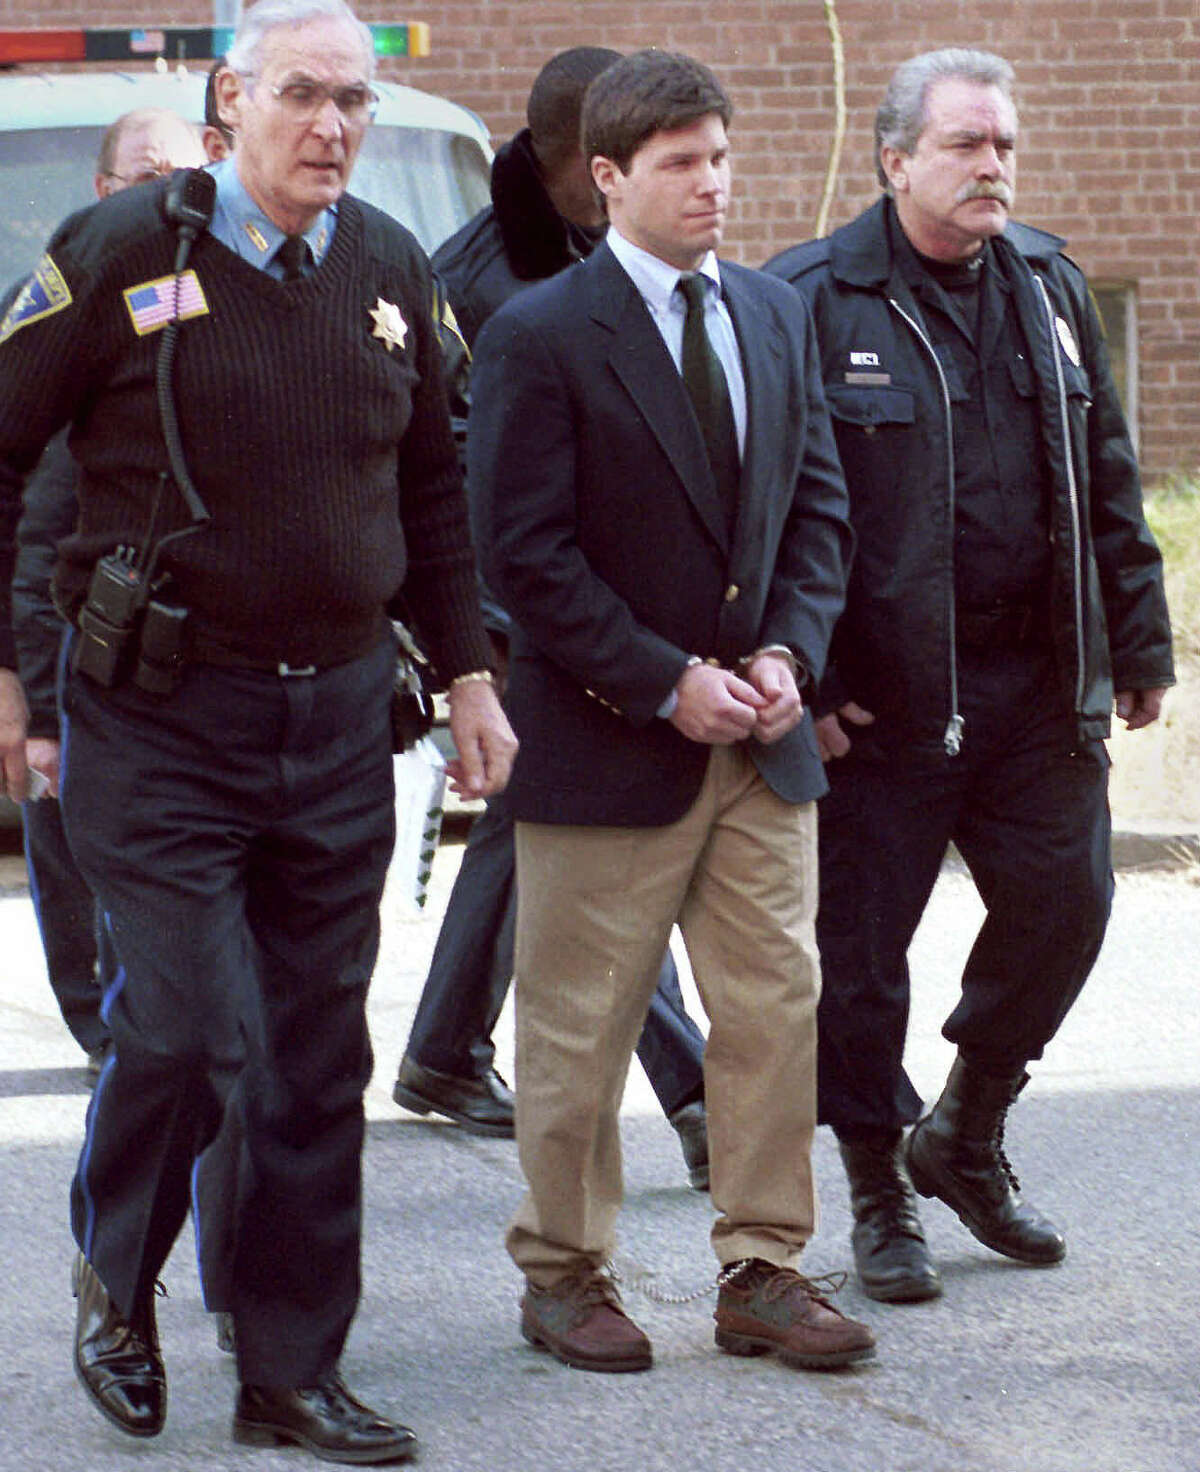 Convicted rapist Alex Kelly, center, is led out of Stamford Superior Court on Dec. 23, 1998. Kelly, who said he was a changed man who is sorry for what he has done during an unsuccesful 2005 bid for parole. But one of his victims says the former international fugitive urged the parole board to keep Kelly behind bars, saying she lived in fear while Kelly enjoyed skiing and mountain climbing in Europe.